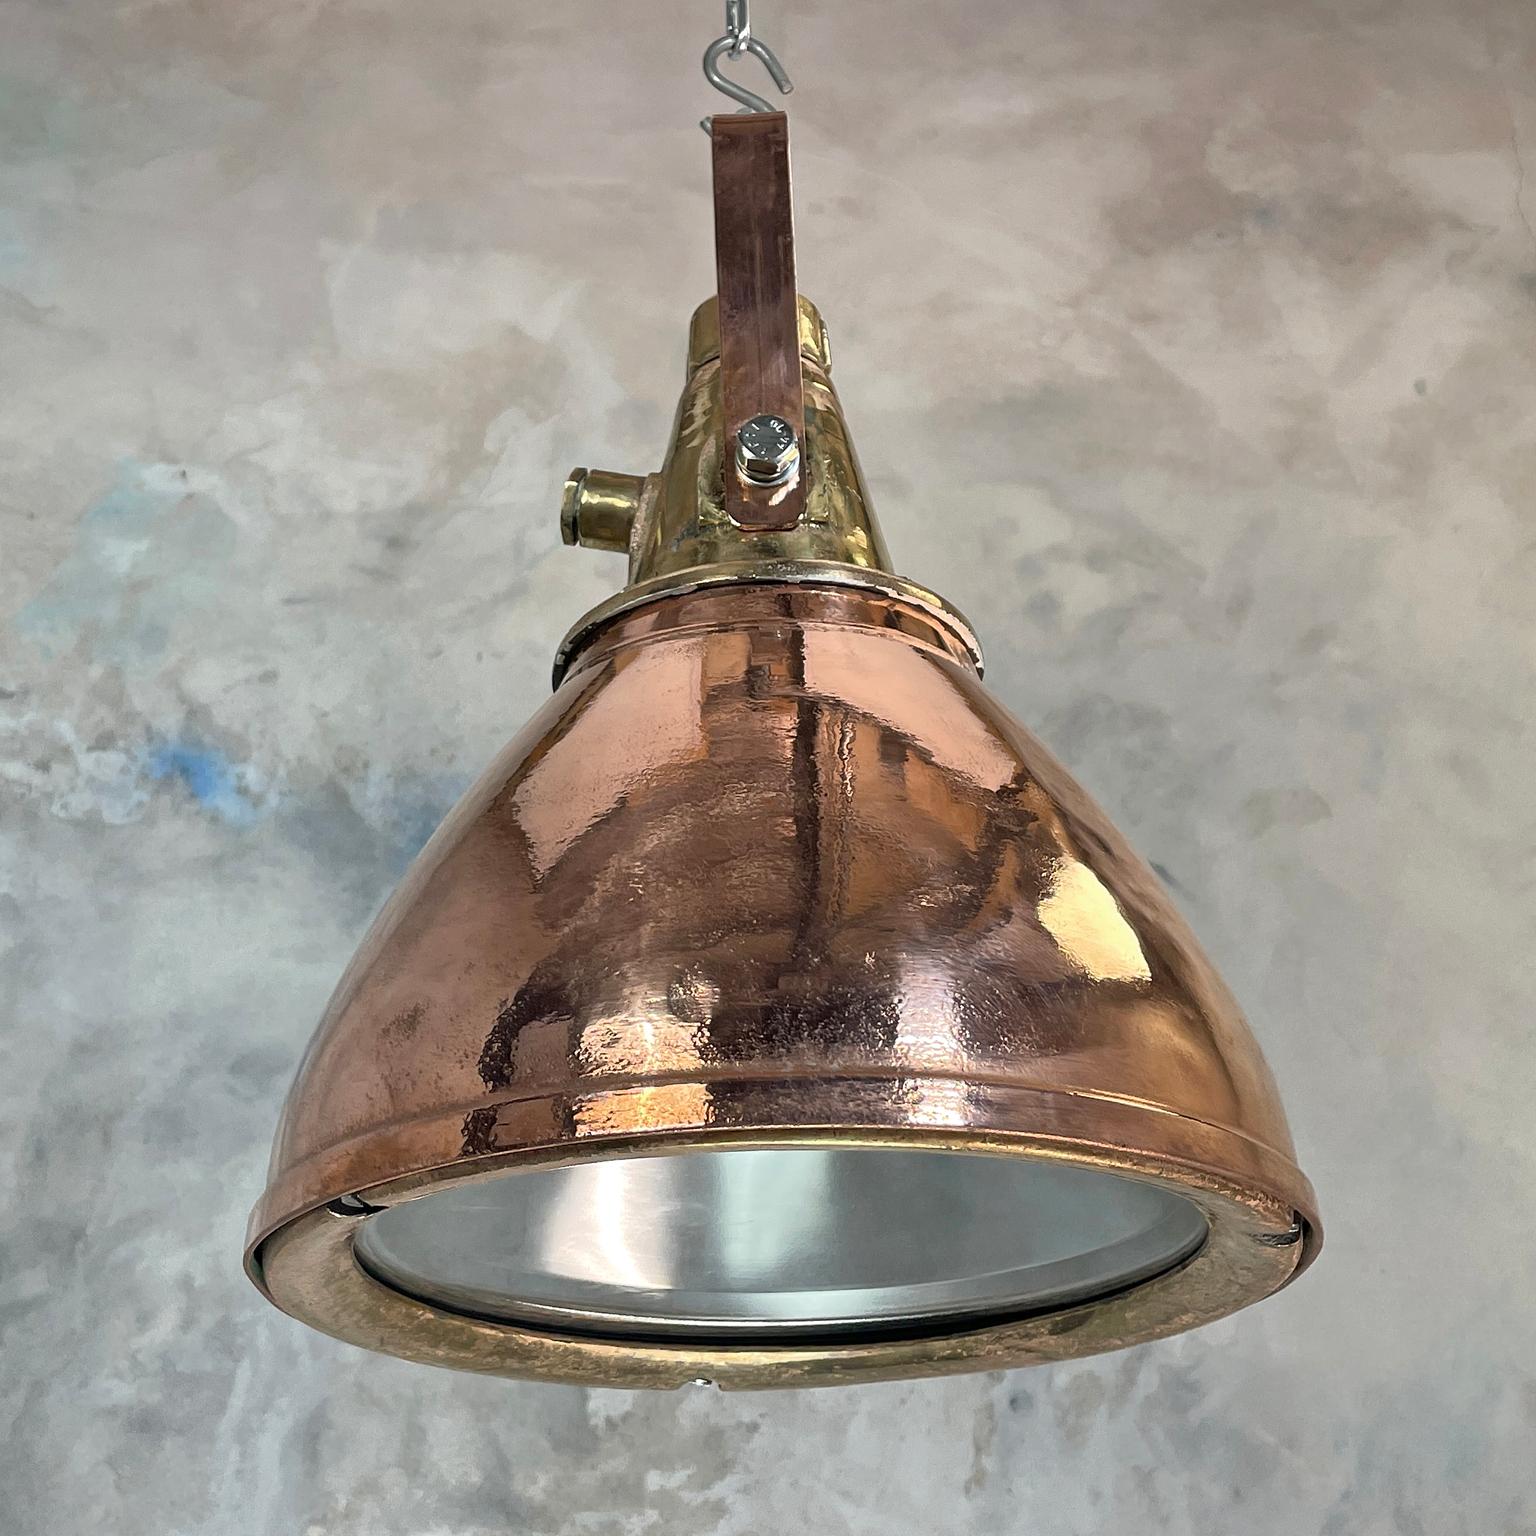 1970s German Copper & Brass Industrial Ceiling Pendant Light with Beam Focus 5